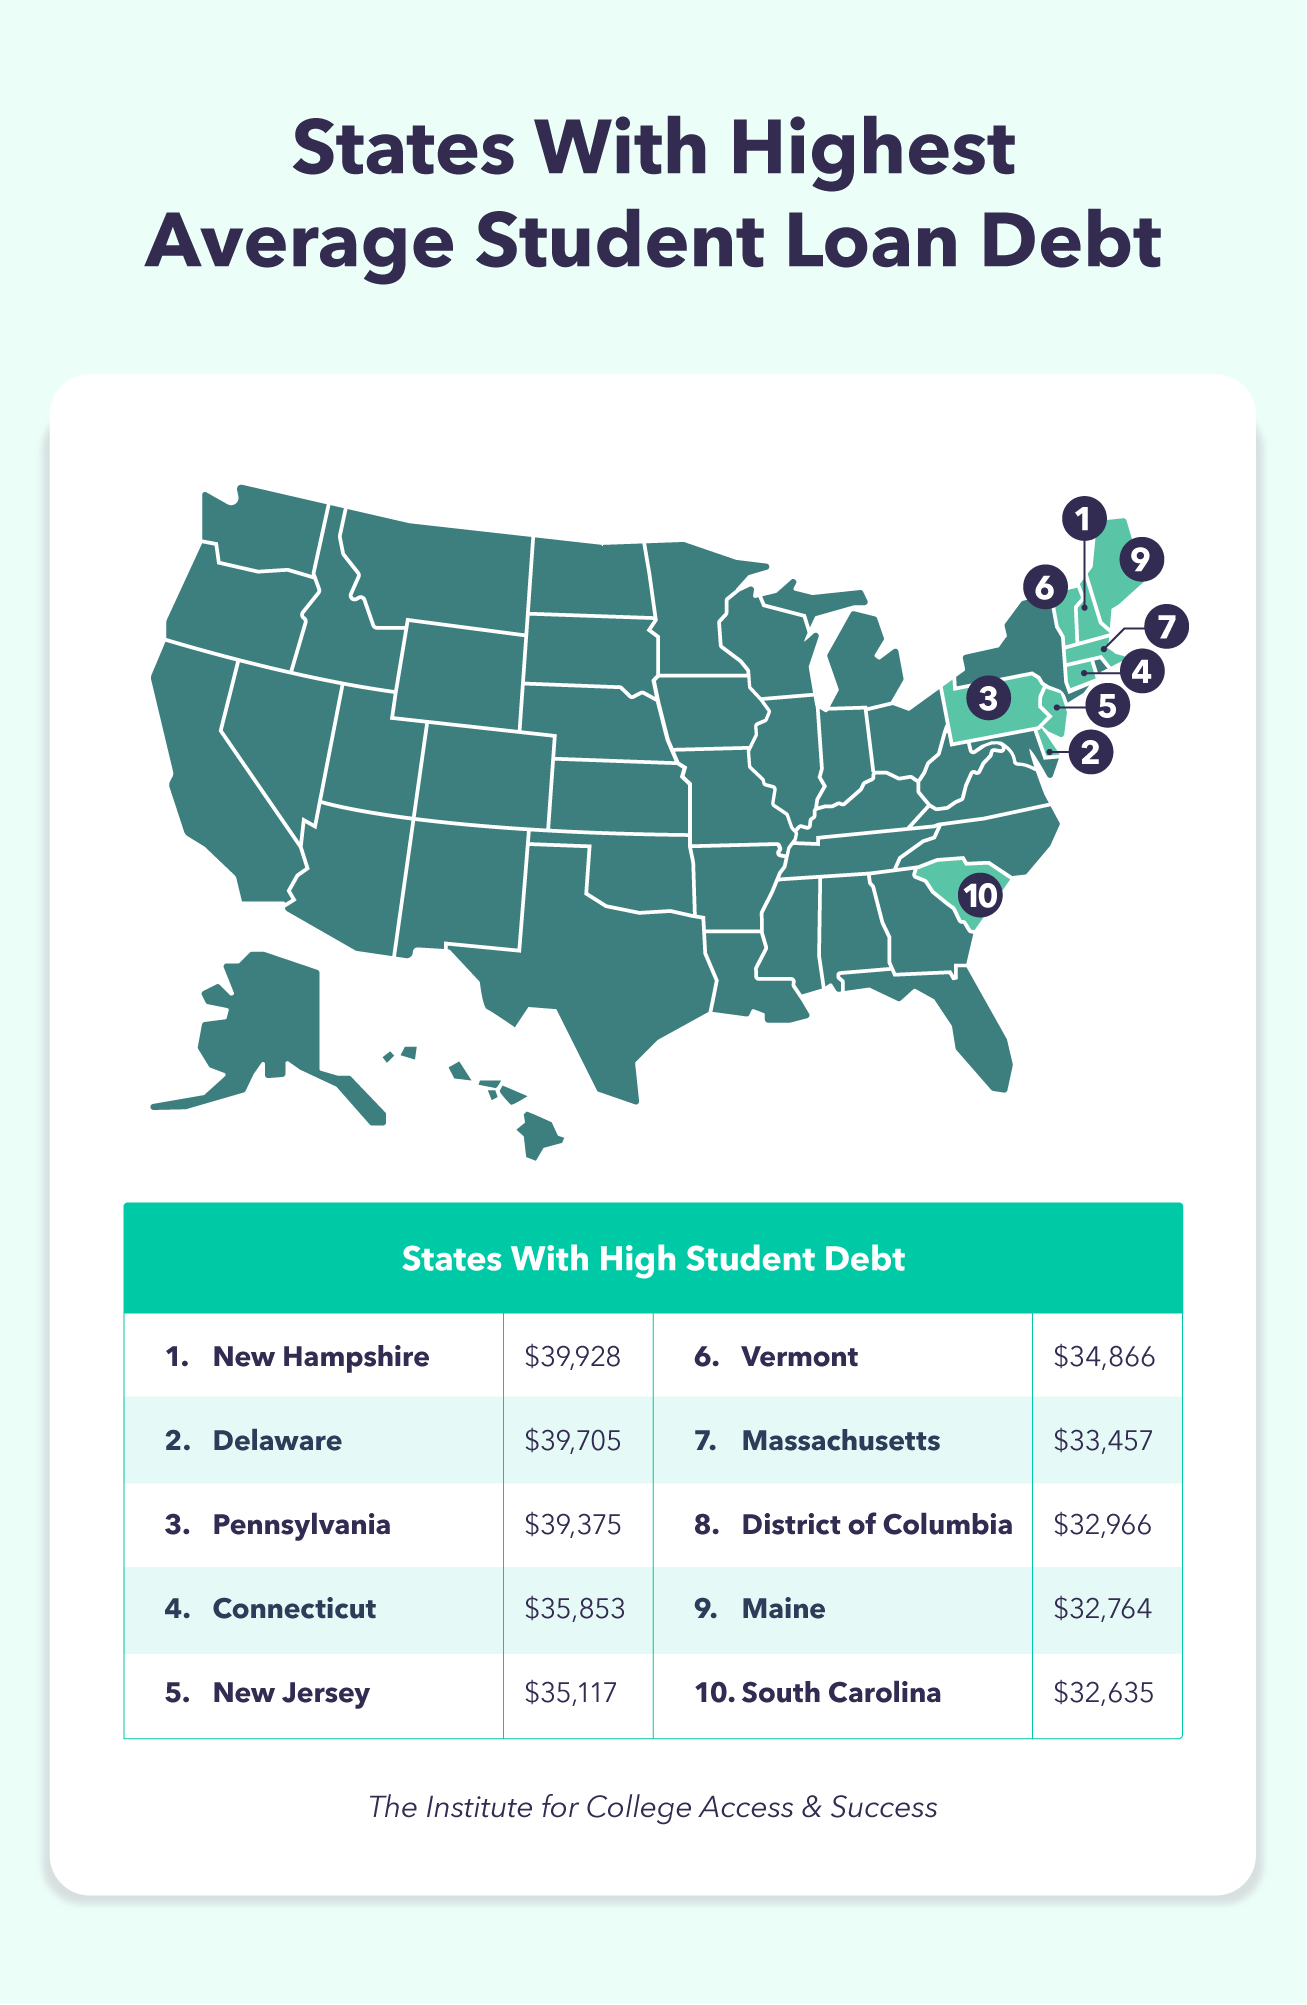 A U.S. map highlights ten states with the highest average student loan debt.